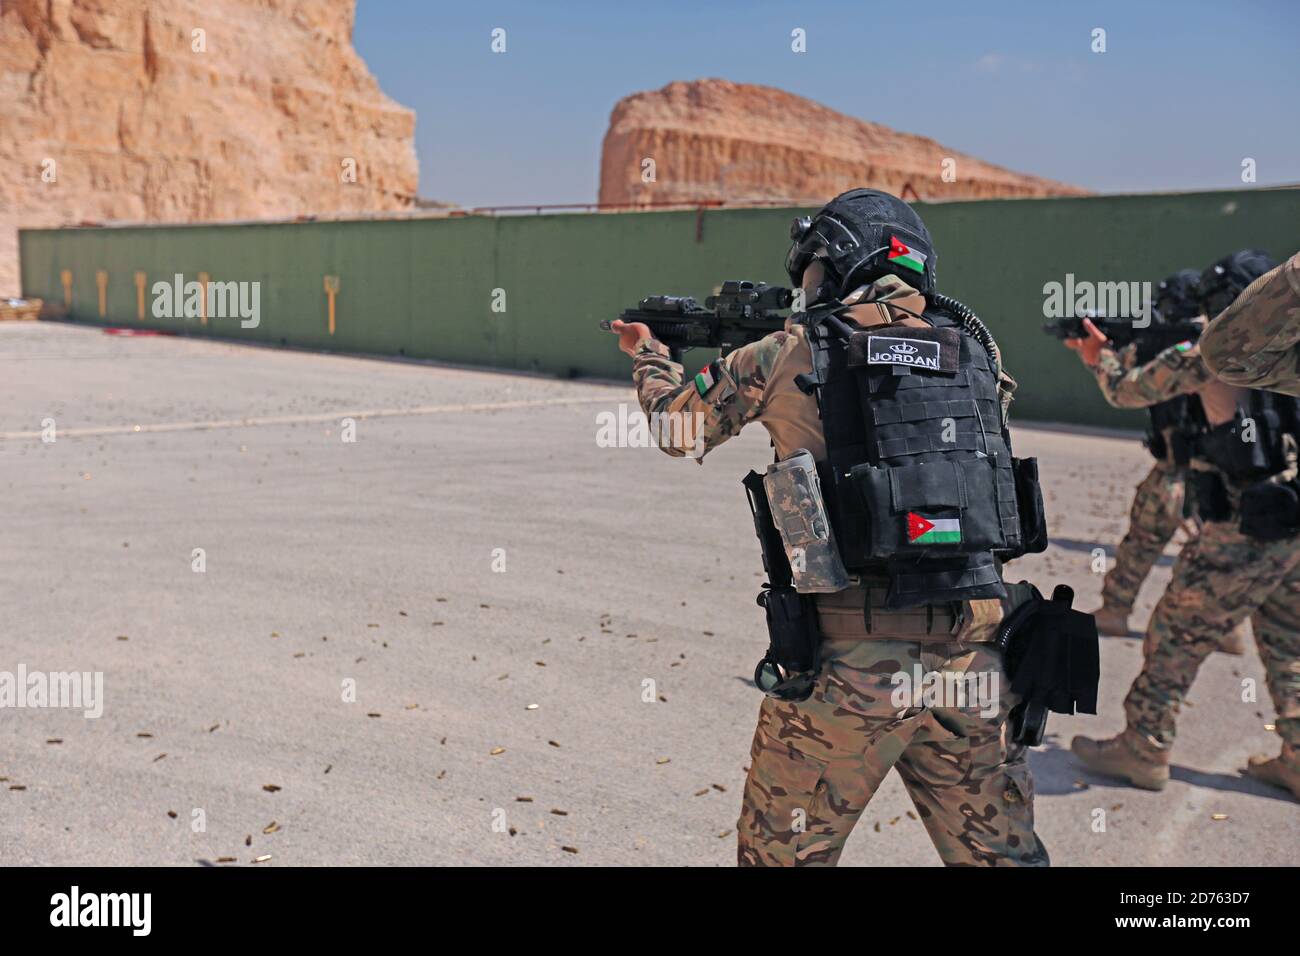 Jordanian Armed Forces Soldiers, Special Unit Two counterterrorism, conducts shooting drills during Eager Lion on King Abdullah II Special Operations Training Center, on April 16, 2018. Eager Lion is a multi-national exercise hosted in Jordan, consisting of U.S. Service Members training with military forces from 19 partner nations, and designed to strengthen military-to-military partnerships and enhance regional stability. (U.S. Army photo by Jose Diaz) Stock Photo